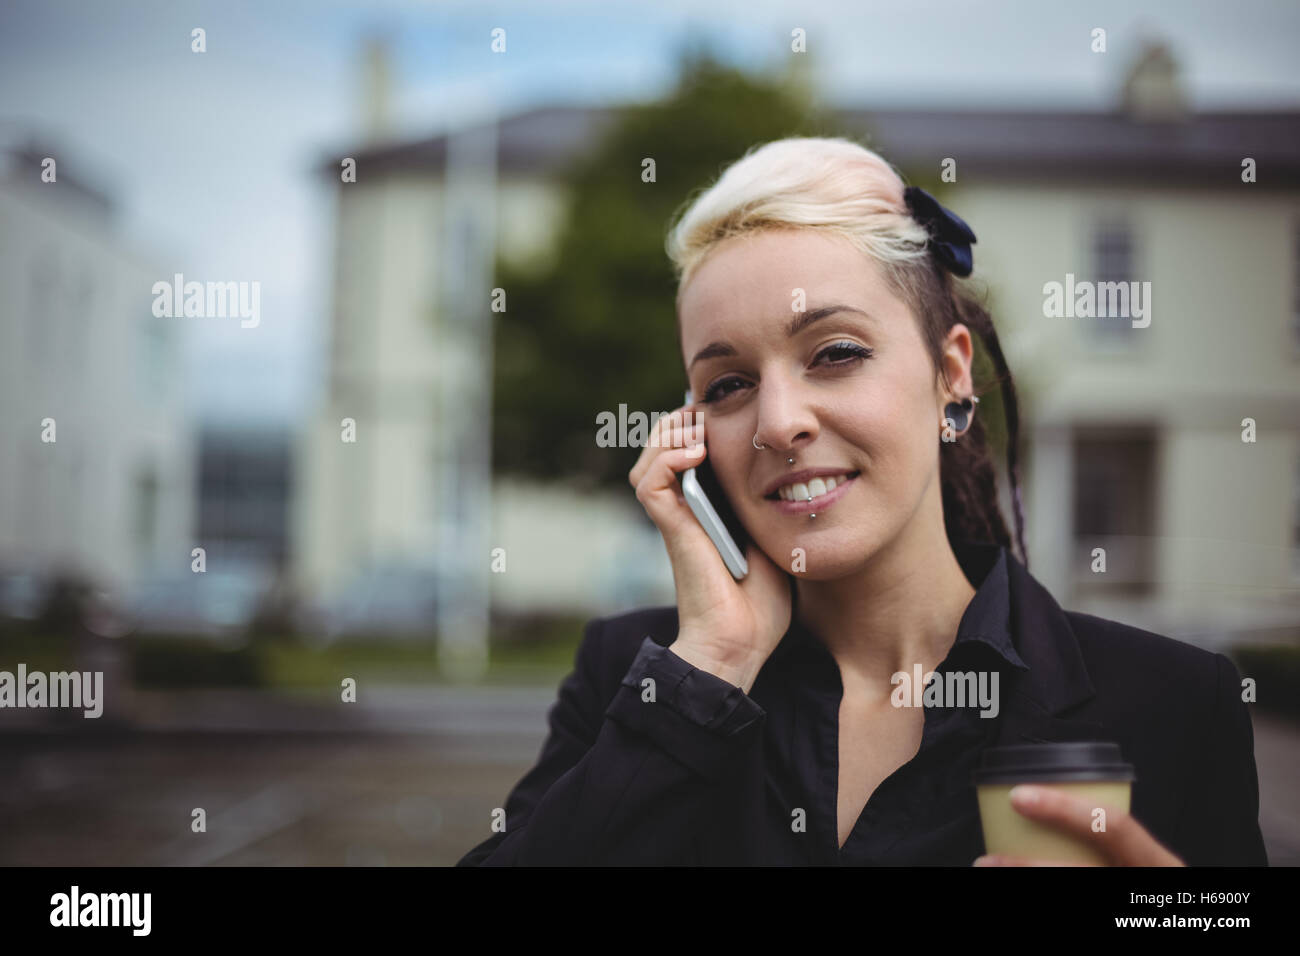 Portrait of businesswoman talking on mobile phone while holding disposable coffee cup Stock Photo